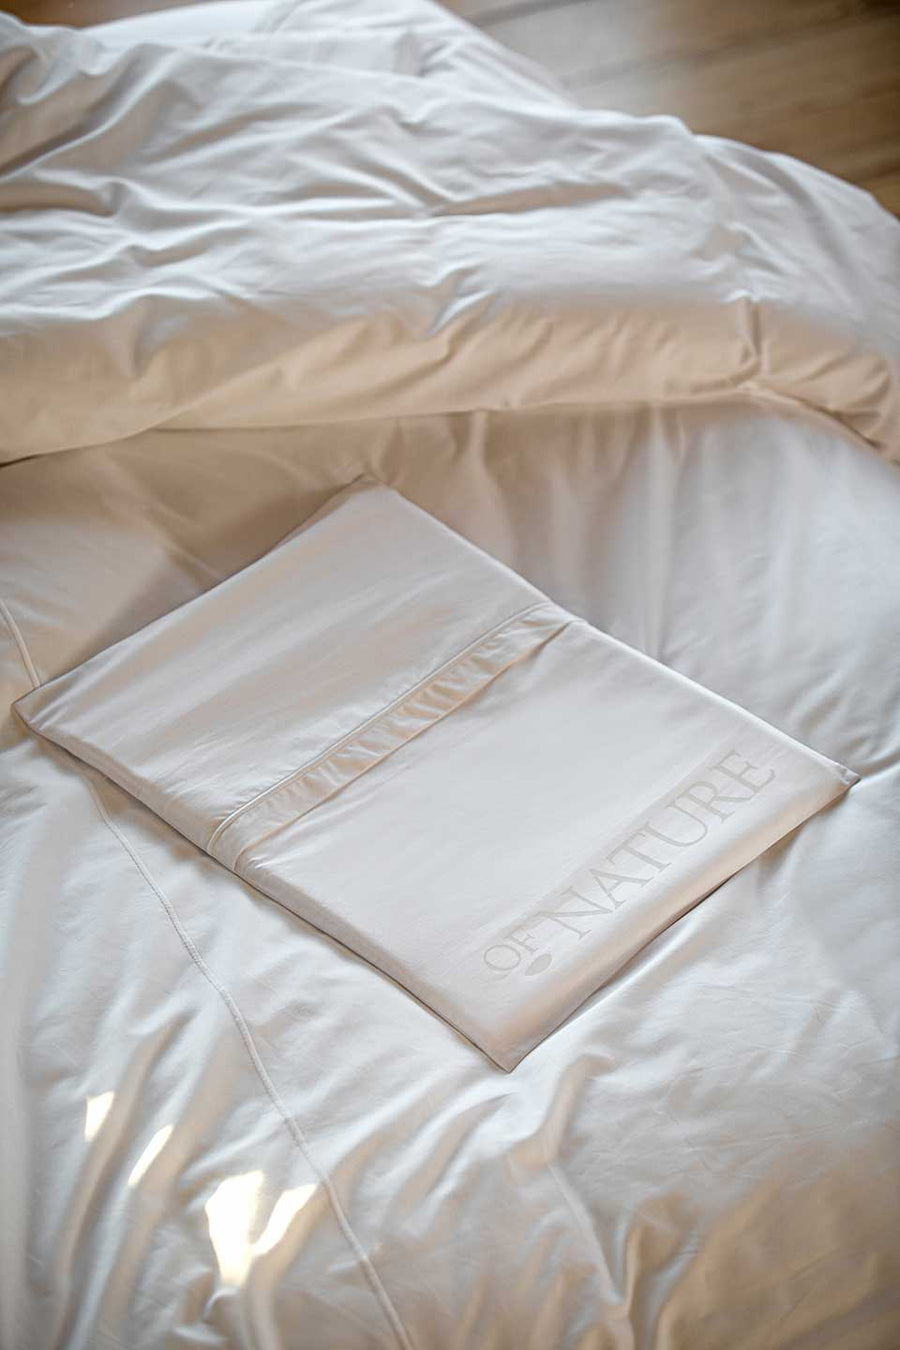 White eco-friendly packaging in Egyptian Cotton™ Percale from THON on top of a gray duvet cover.